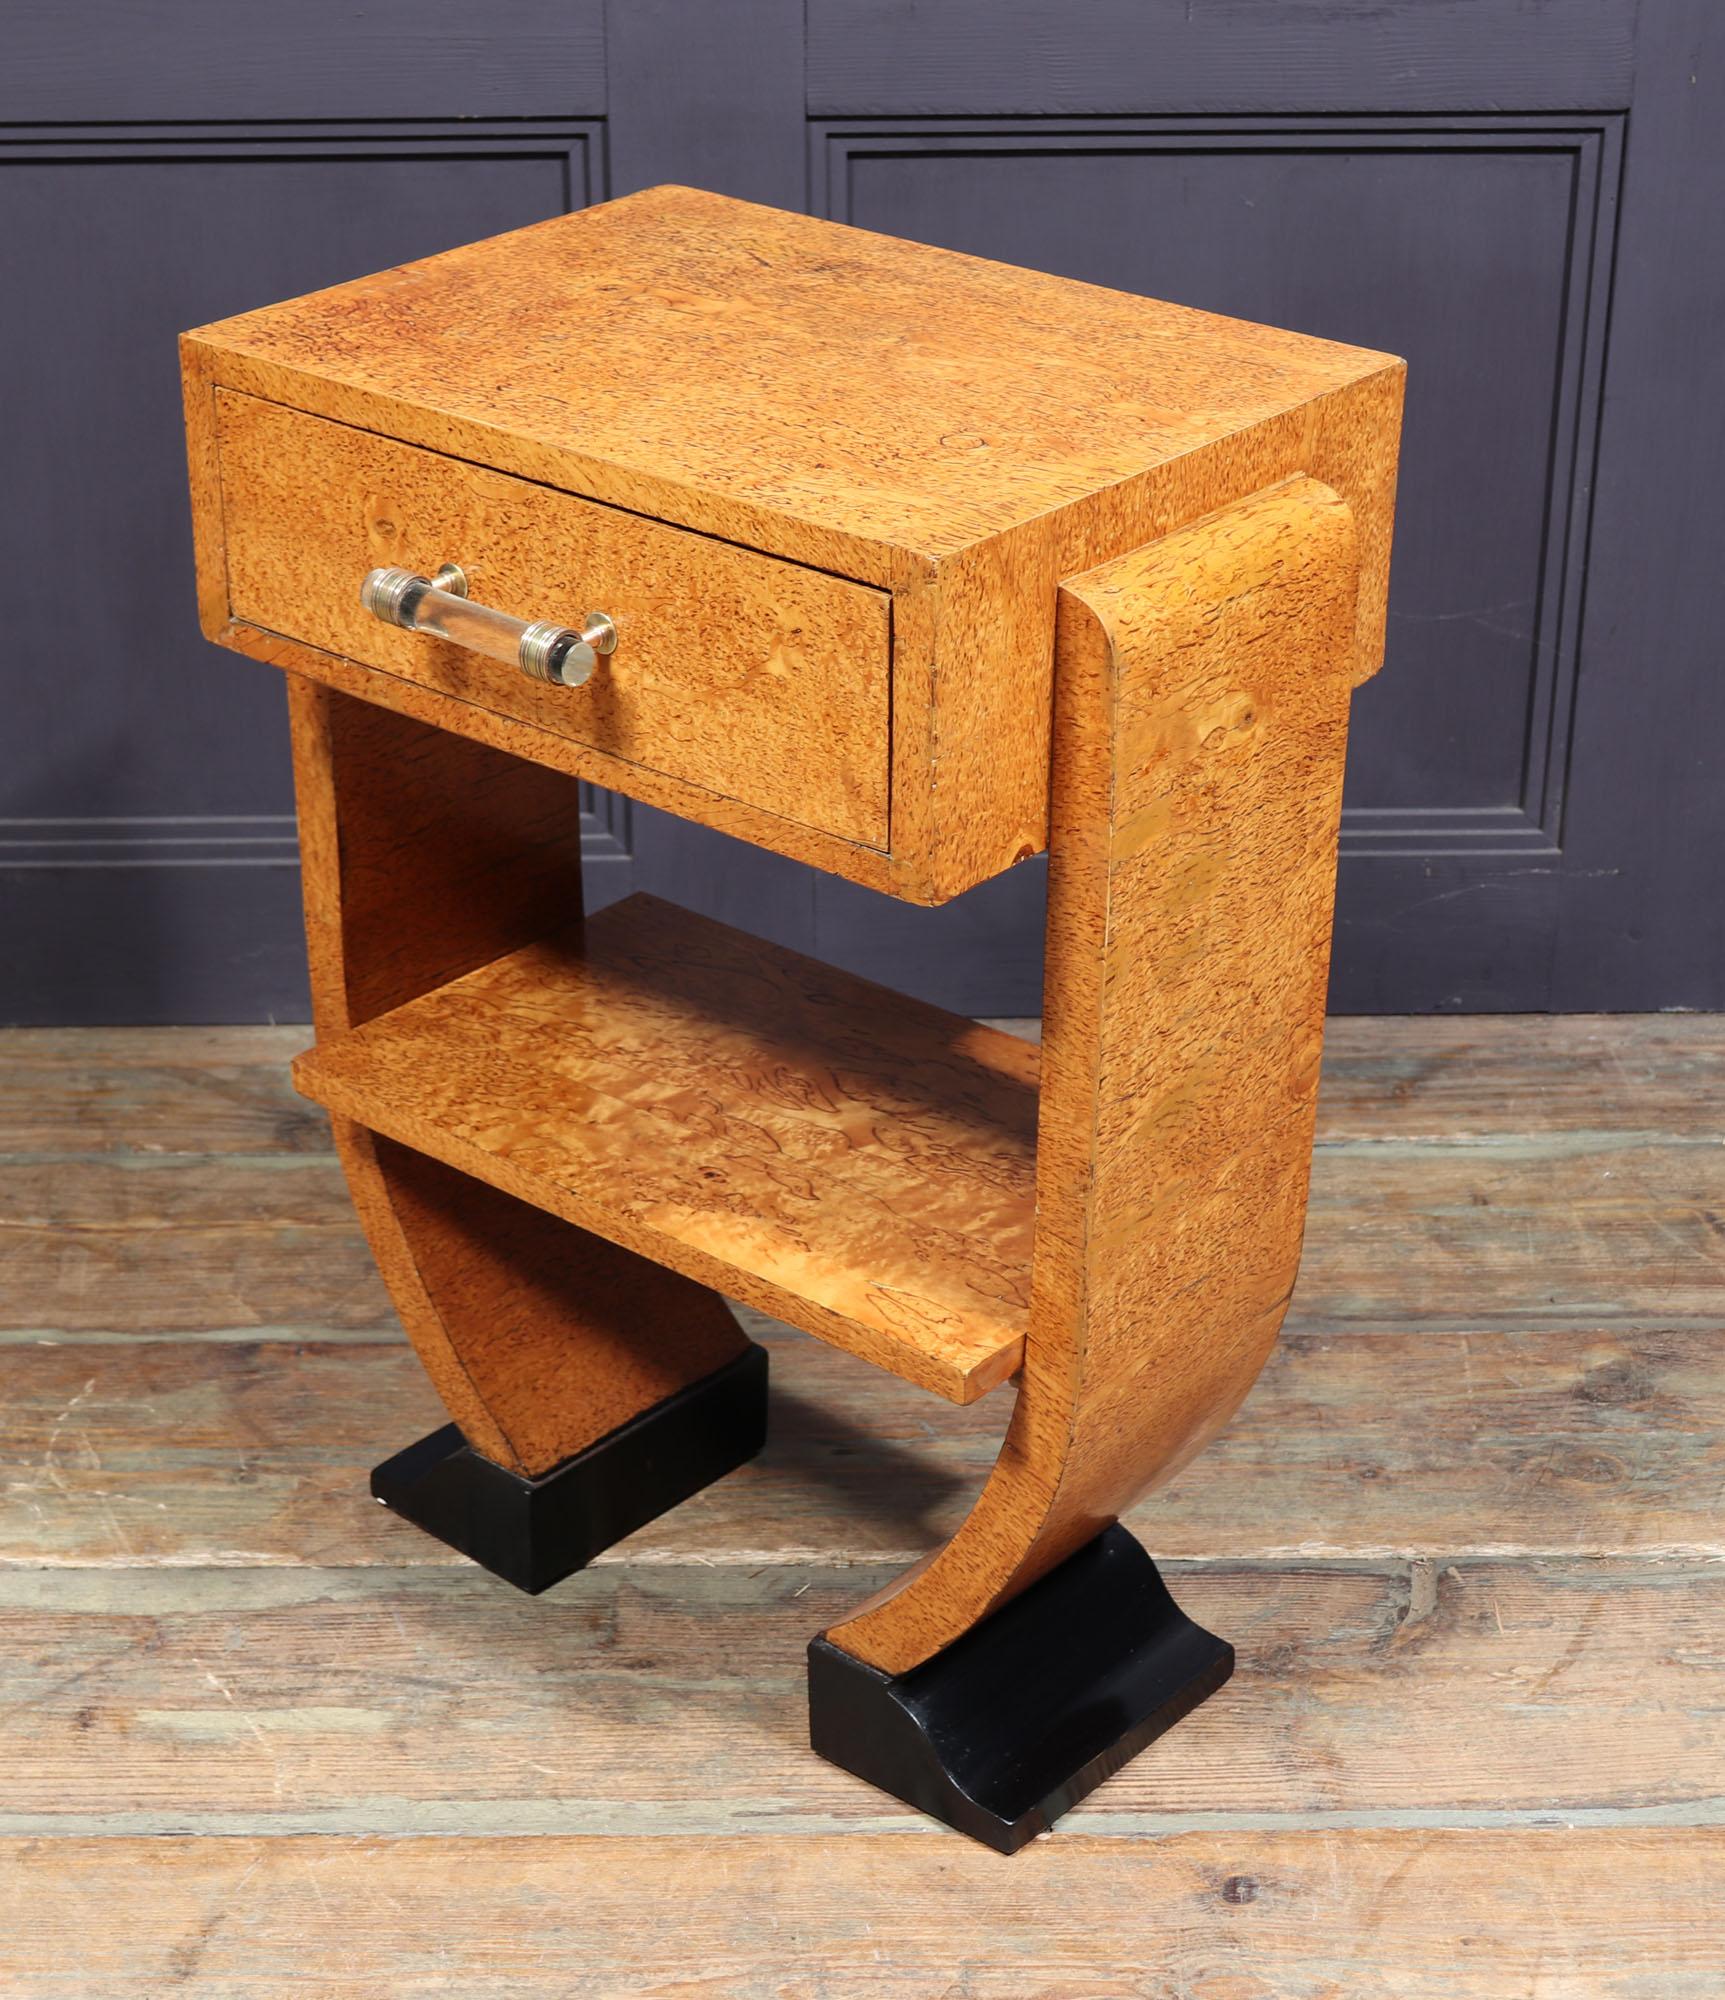 This original vintage art deco side table is a true find. Crafted from Karelian birch, it features exquisite geometric and symmetrical designs that are sure to be the envy of all. From its graceful shaped legs to its intricate glass handle, this